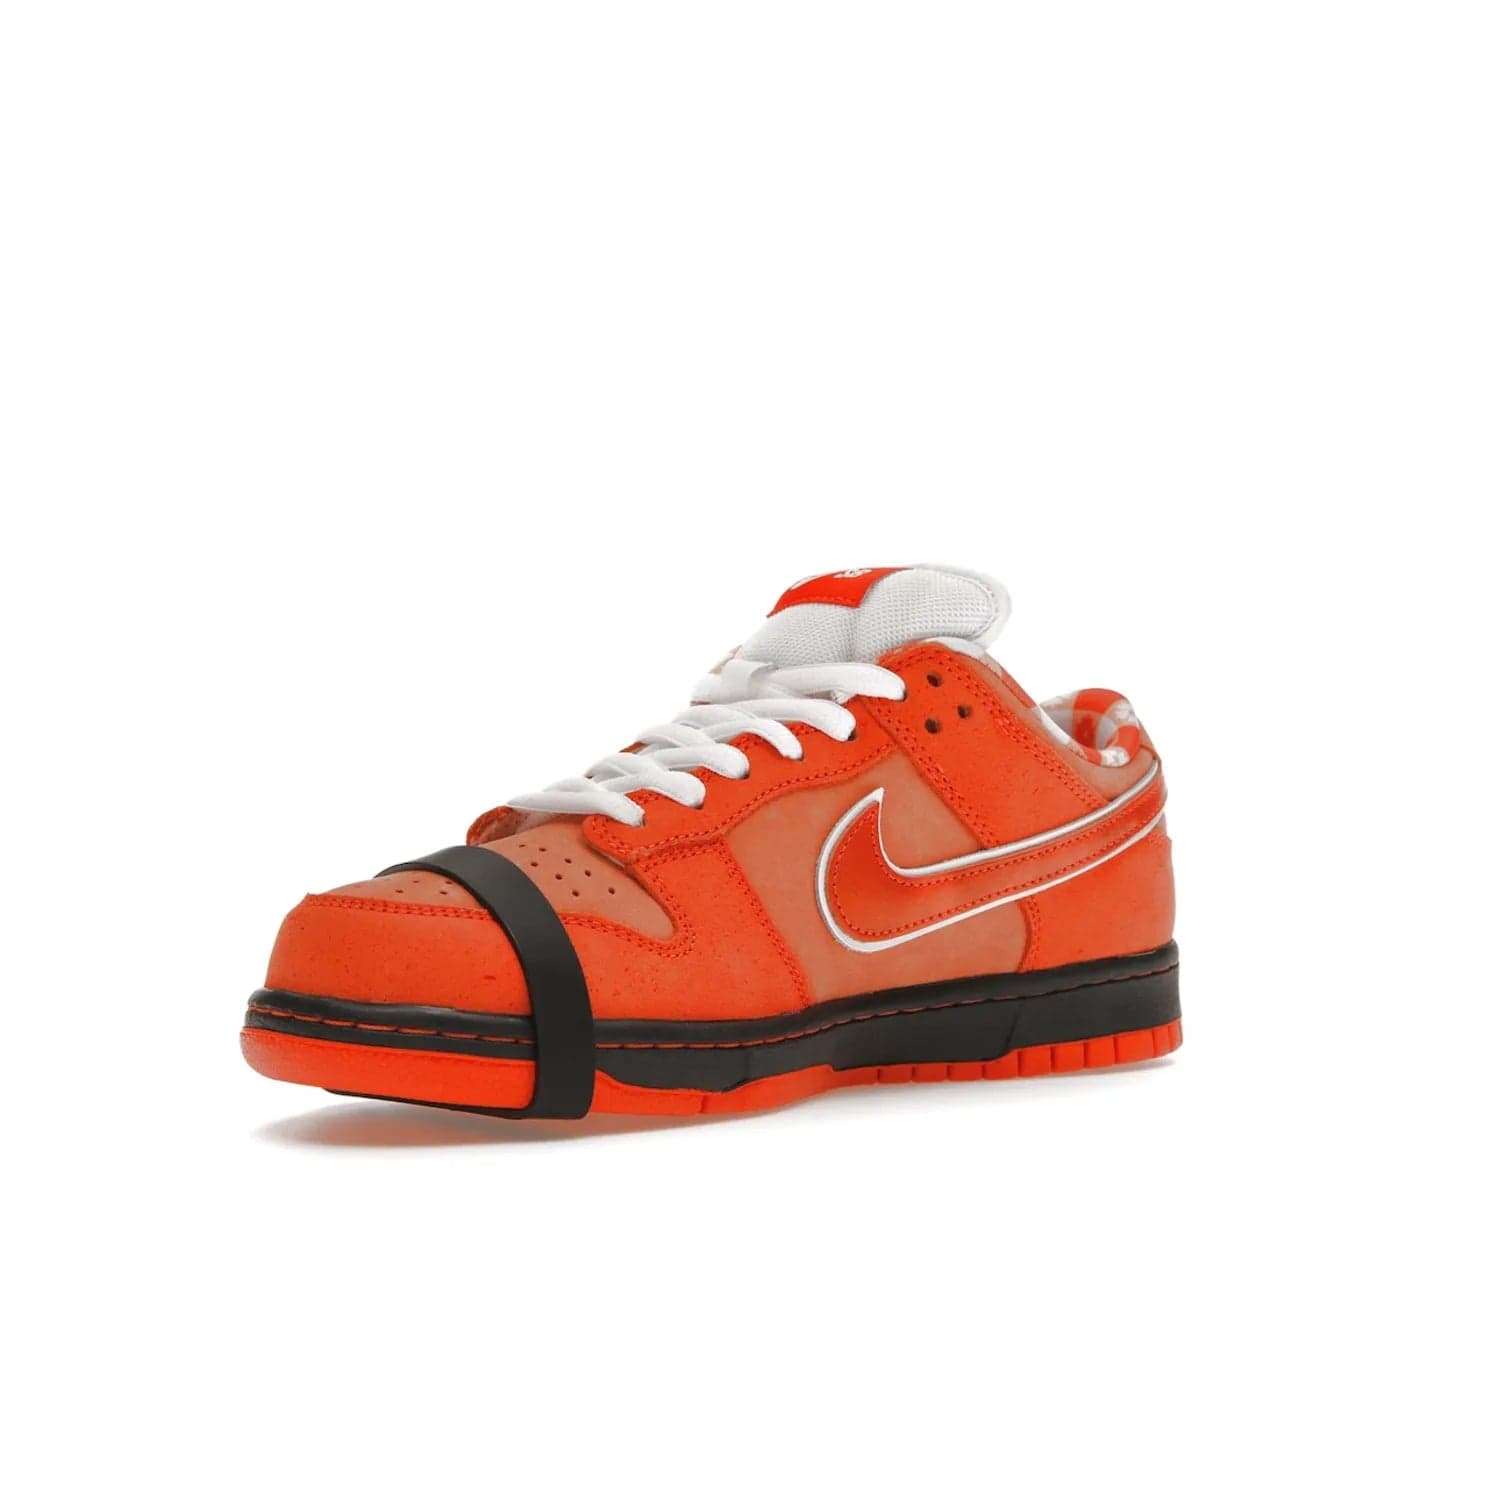 Nike SB Dunk Low Concepts Orange Lobster - Image 15 - Only at www.BallersClubKickz.com - Make a statement with the Nike SB Dunk Low Concepts Orange Lobster. Variety of orange hues, nubuck upper, bib-inspired lining & rubber outsole create bold look & comfortable blend of style. Available December 20th, 2022.